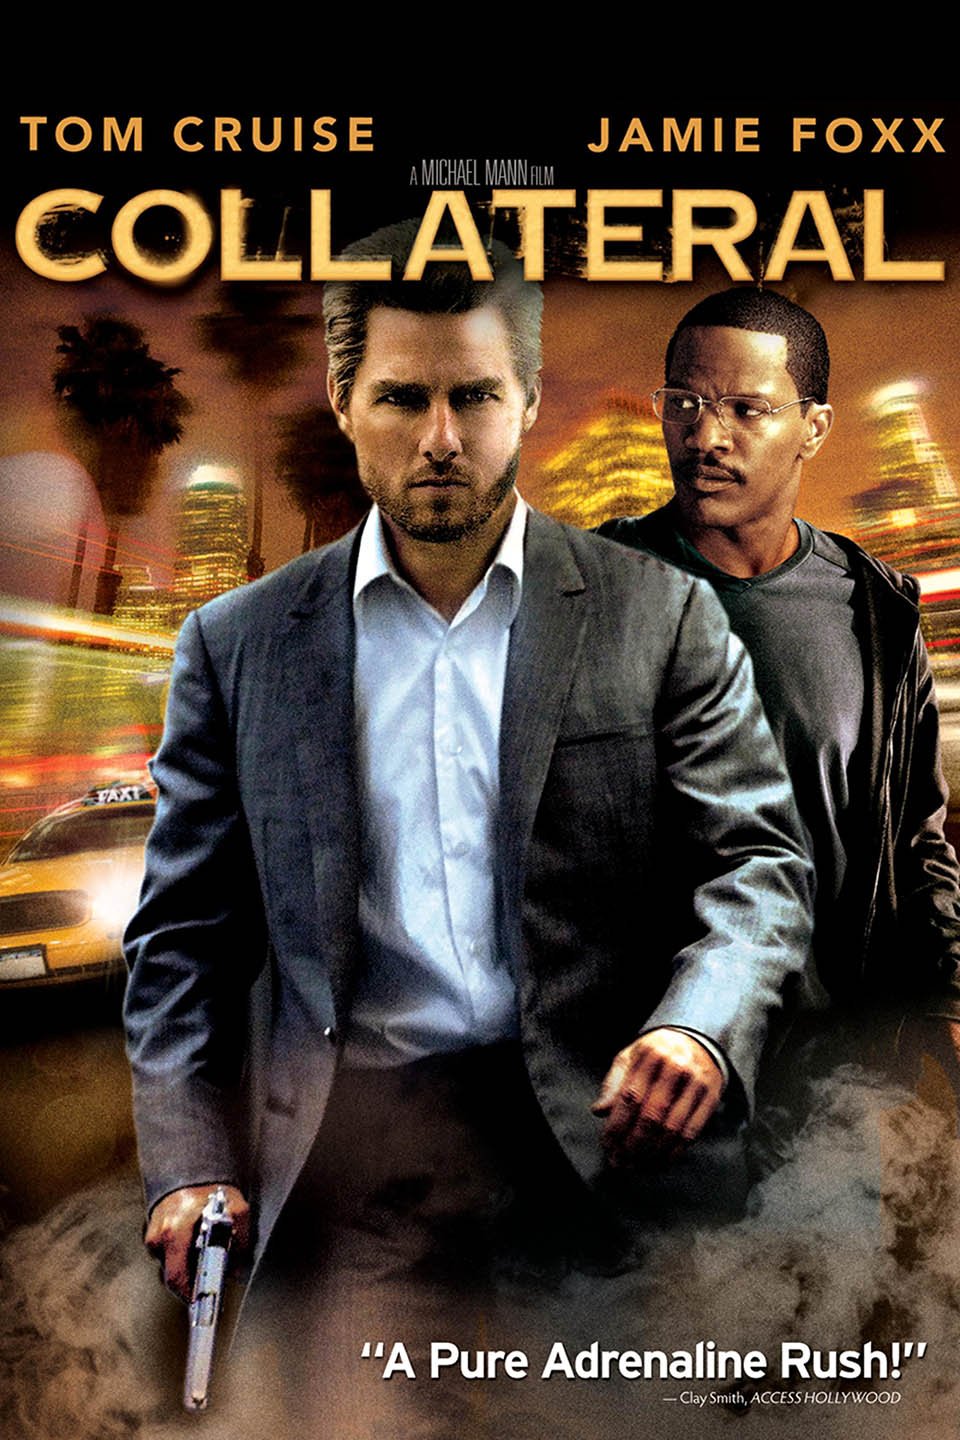 tom cruise collateral review